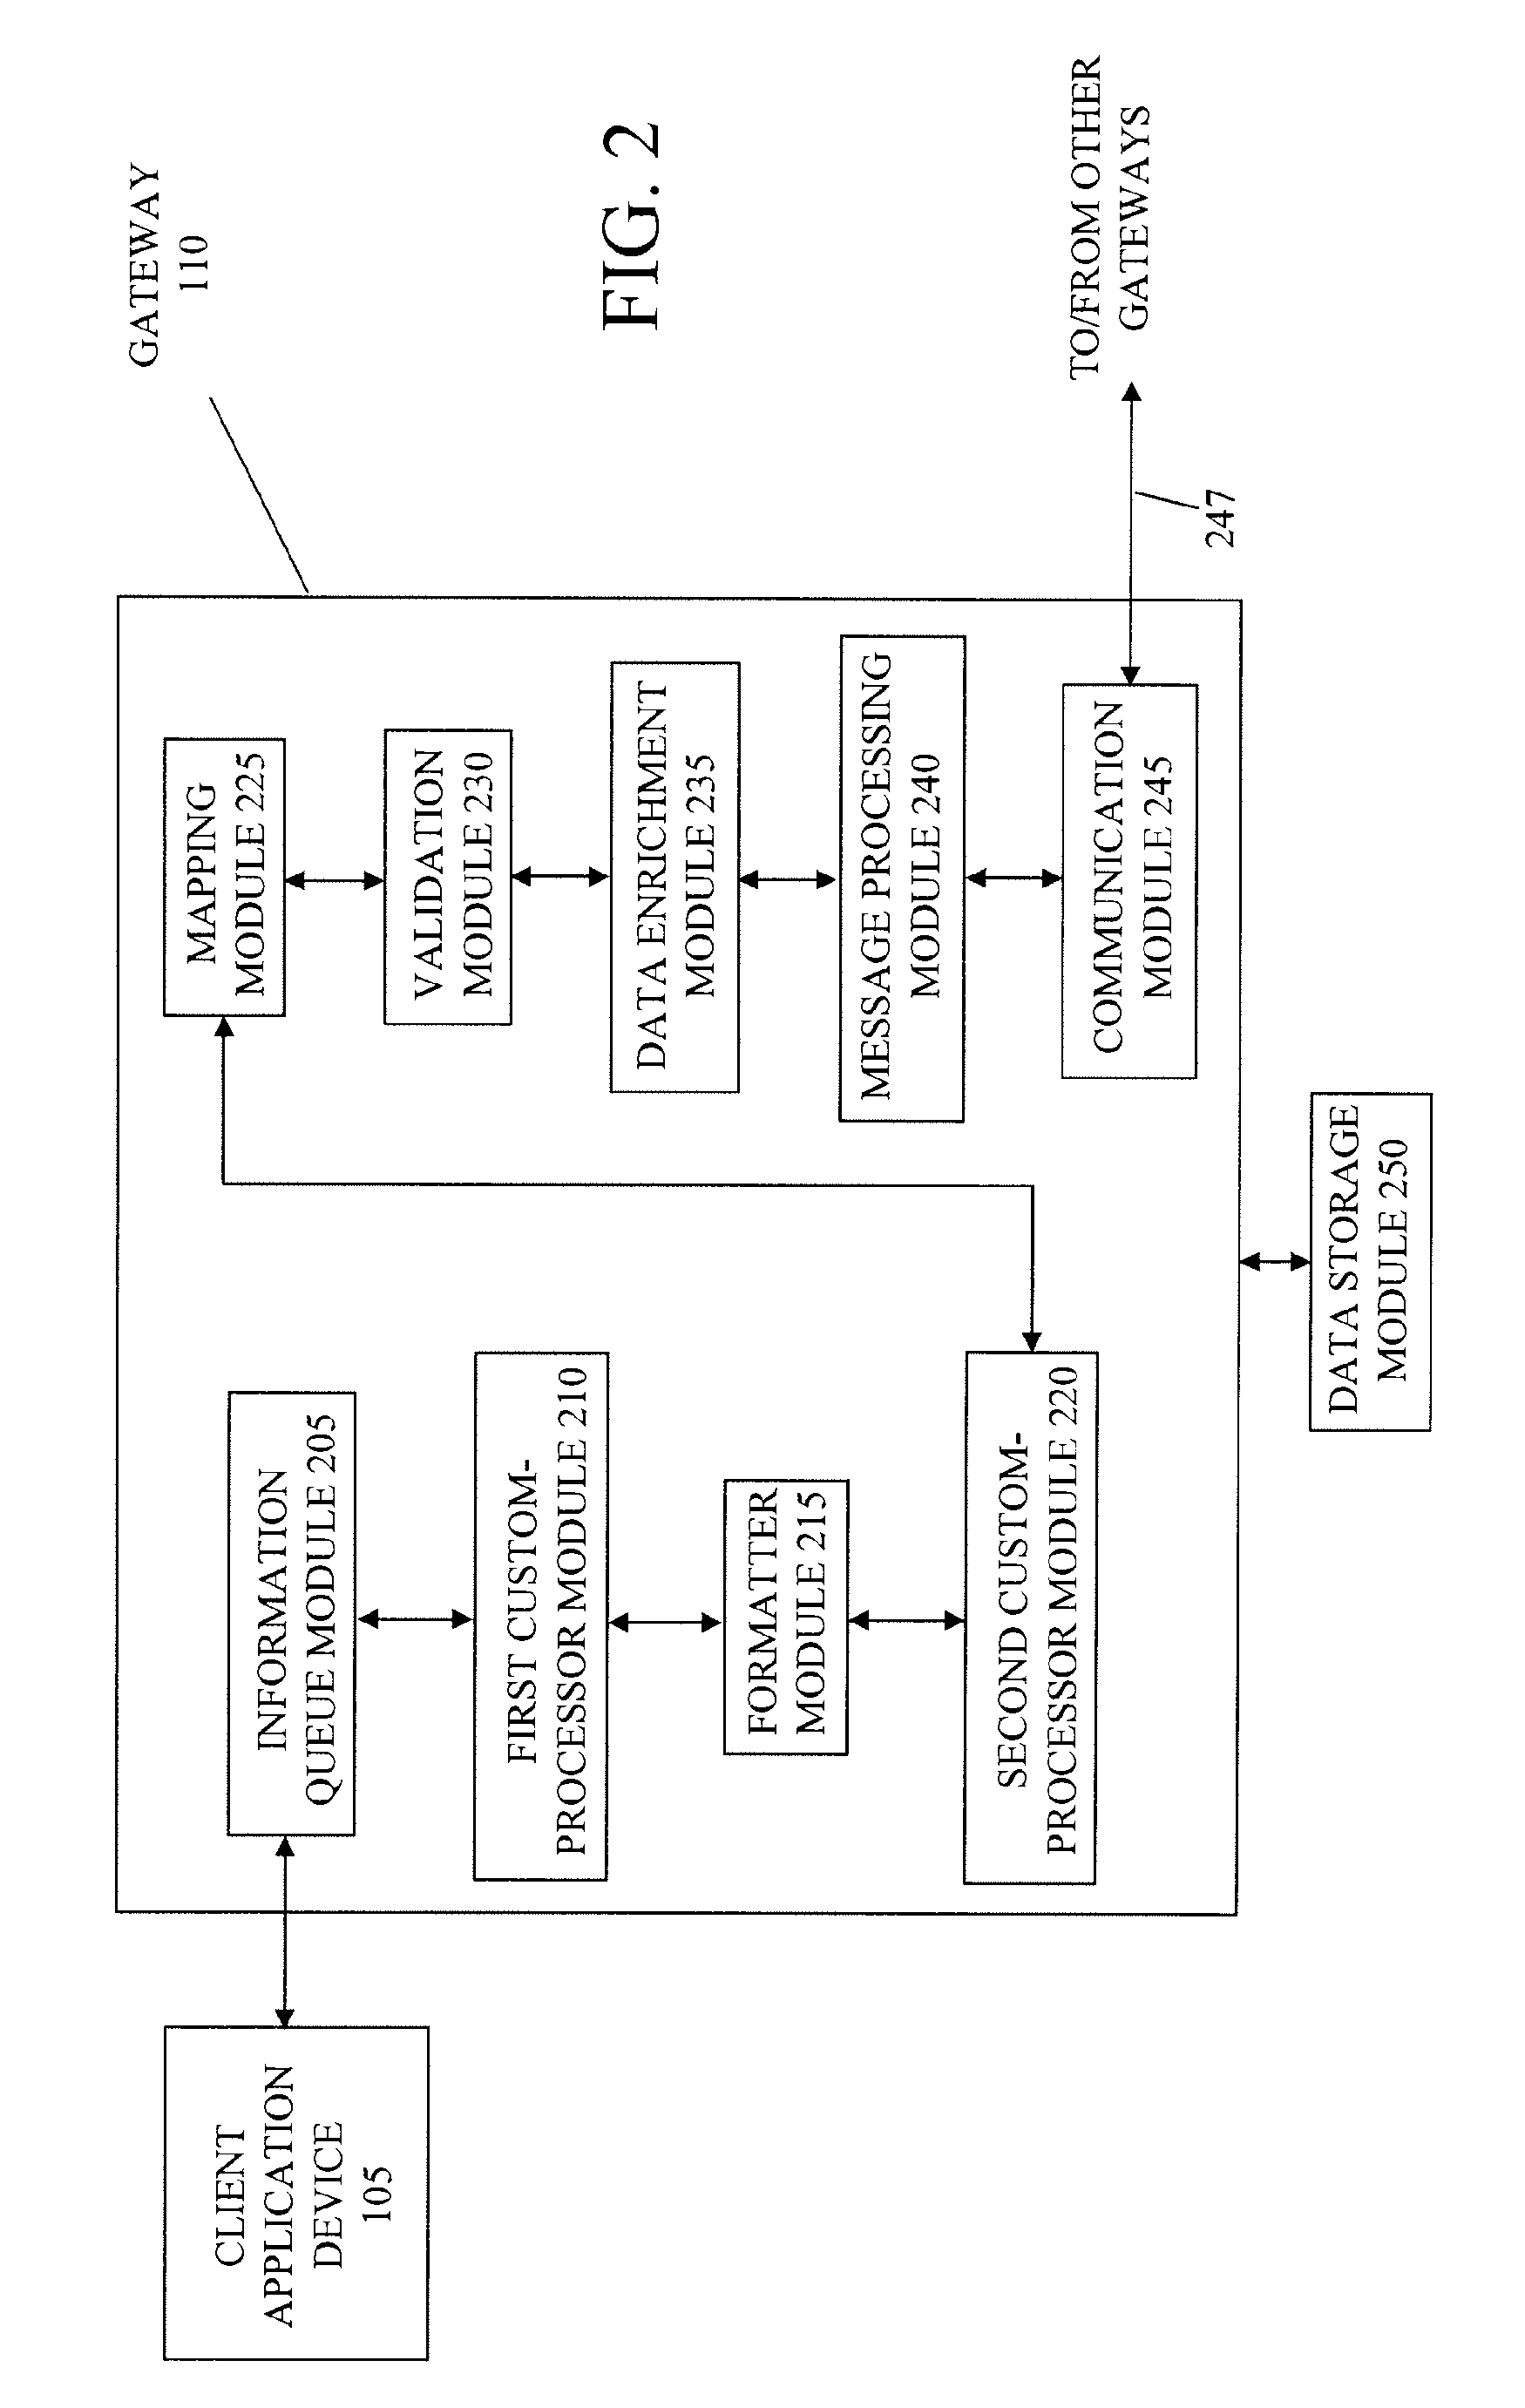 System and method for exchanging information among exchange applications